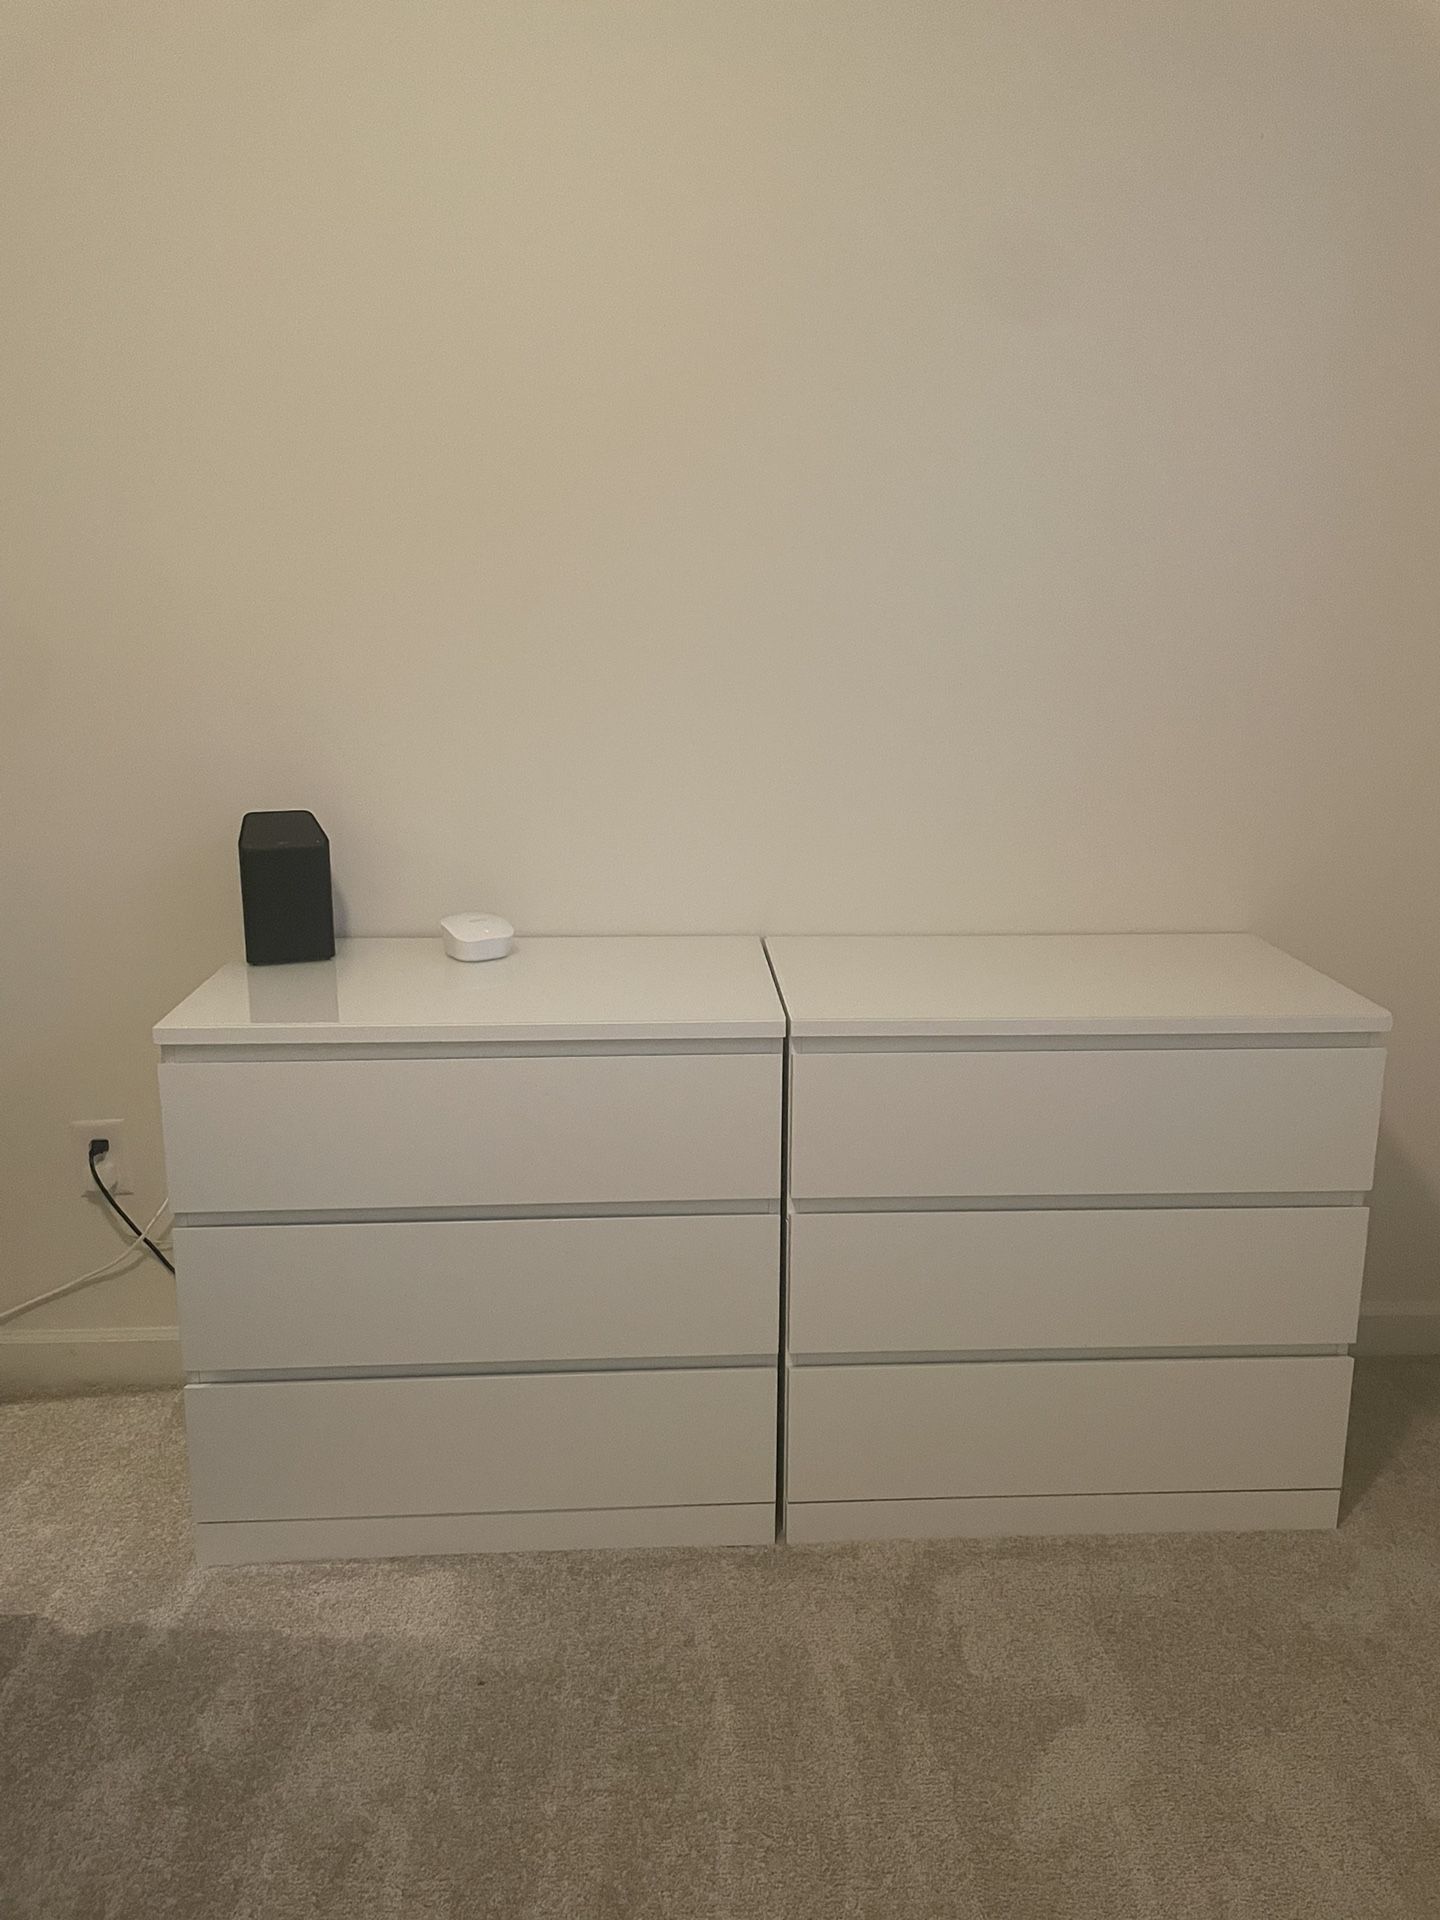 2 IKEA MALM 3-drawer Chests With Additional Glass Tops